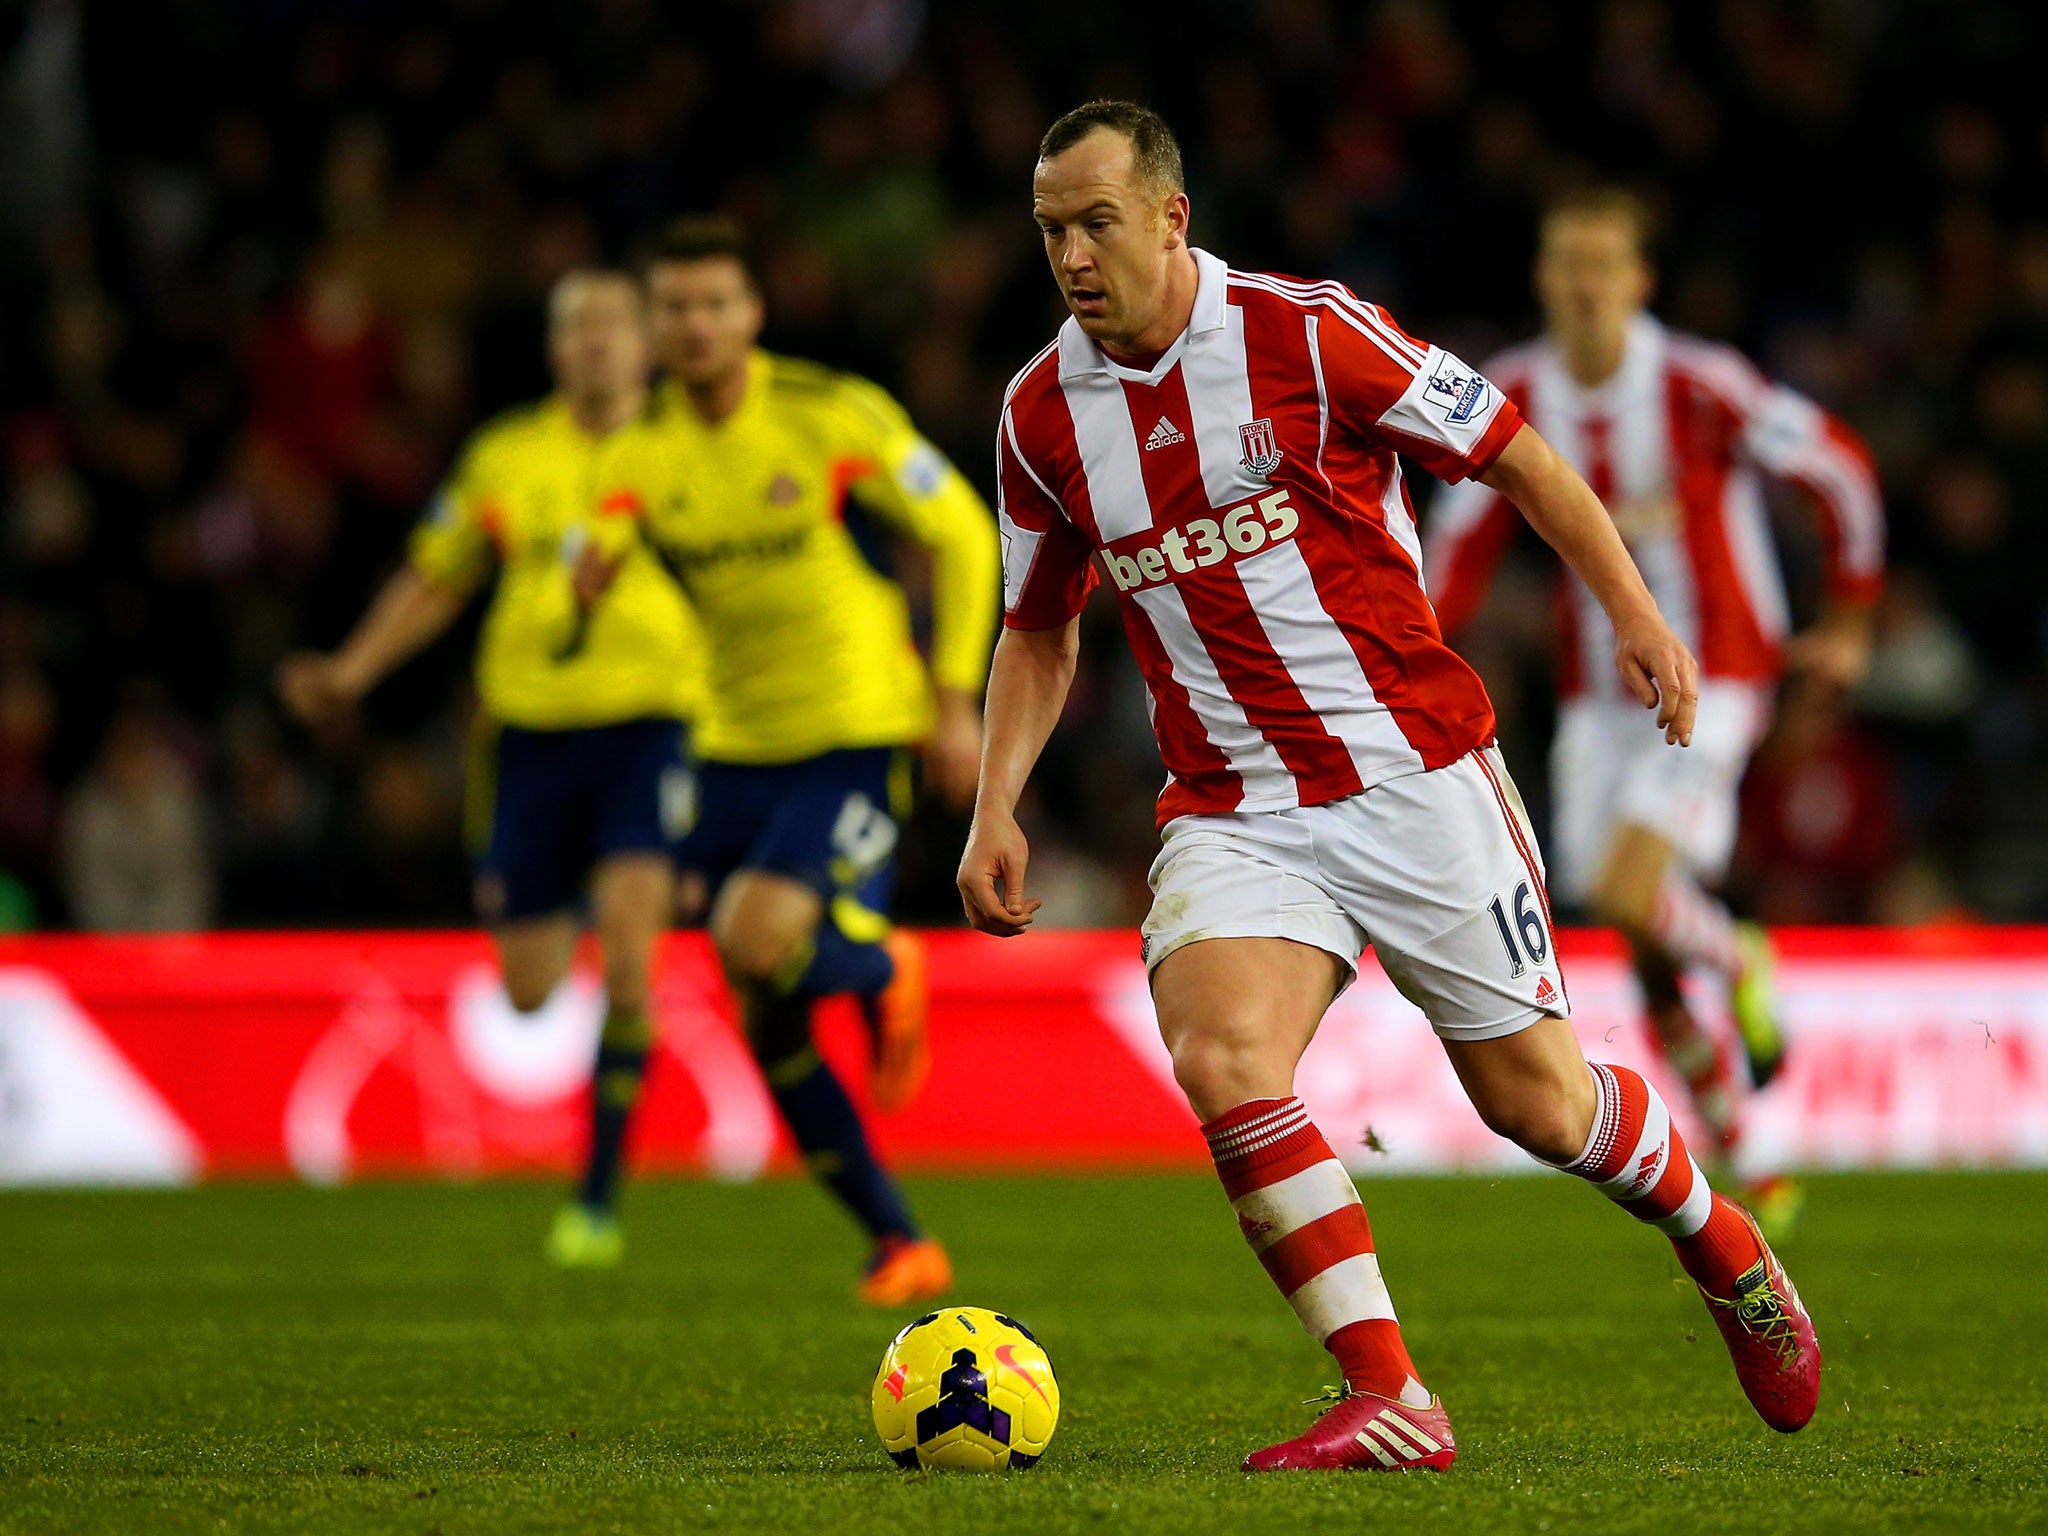 Charlie Adam of Stoke City runs with the ball